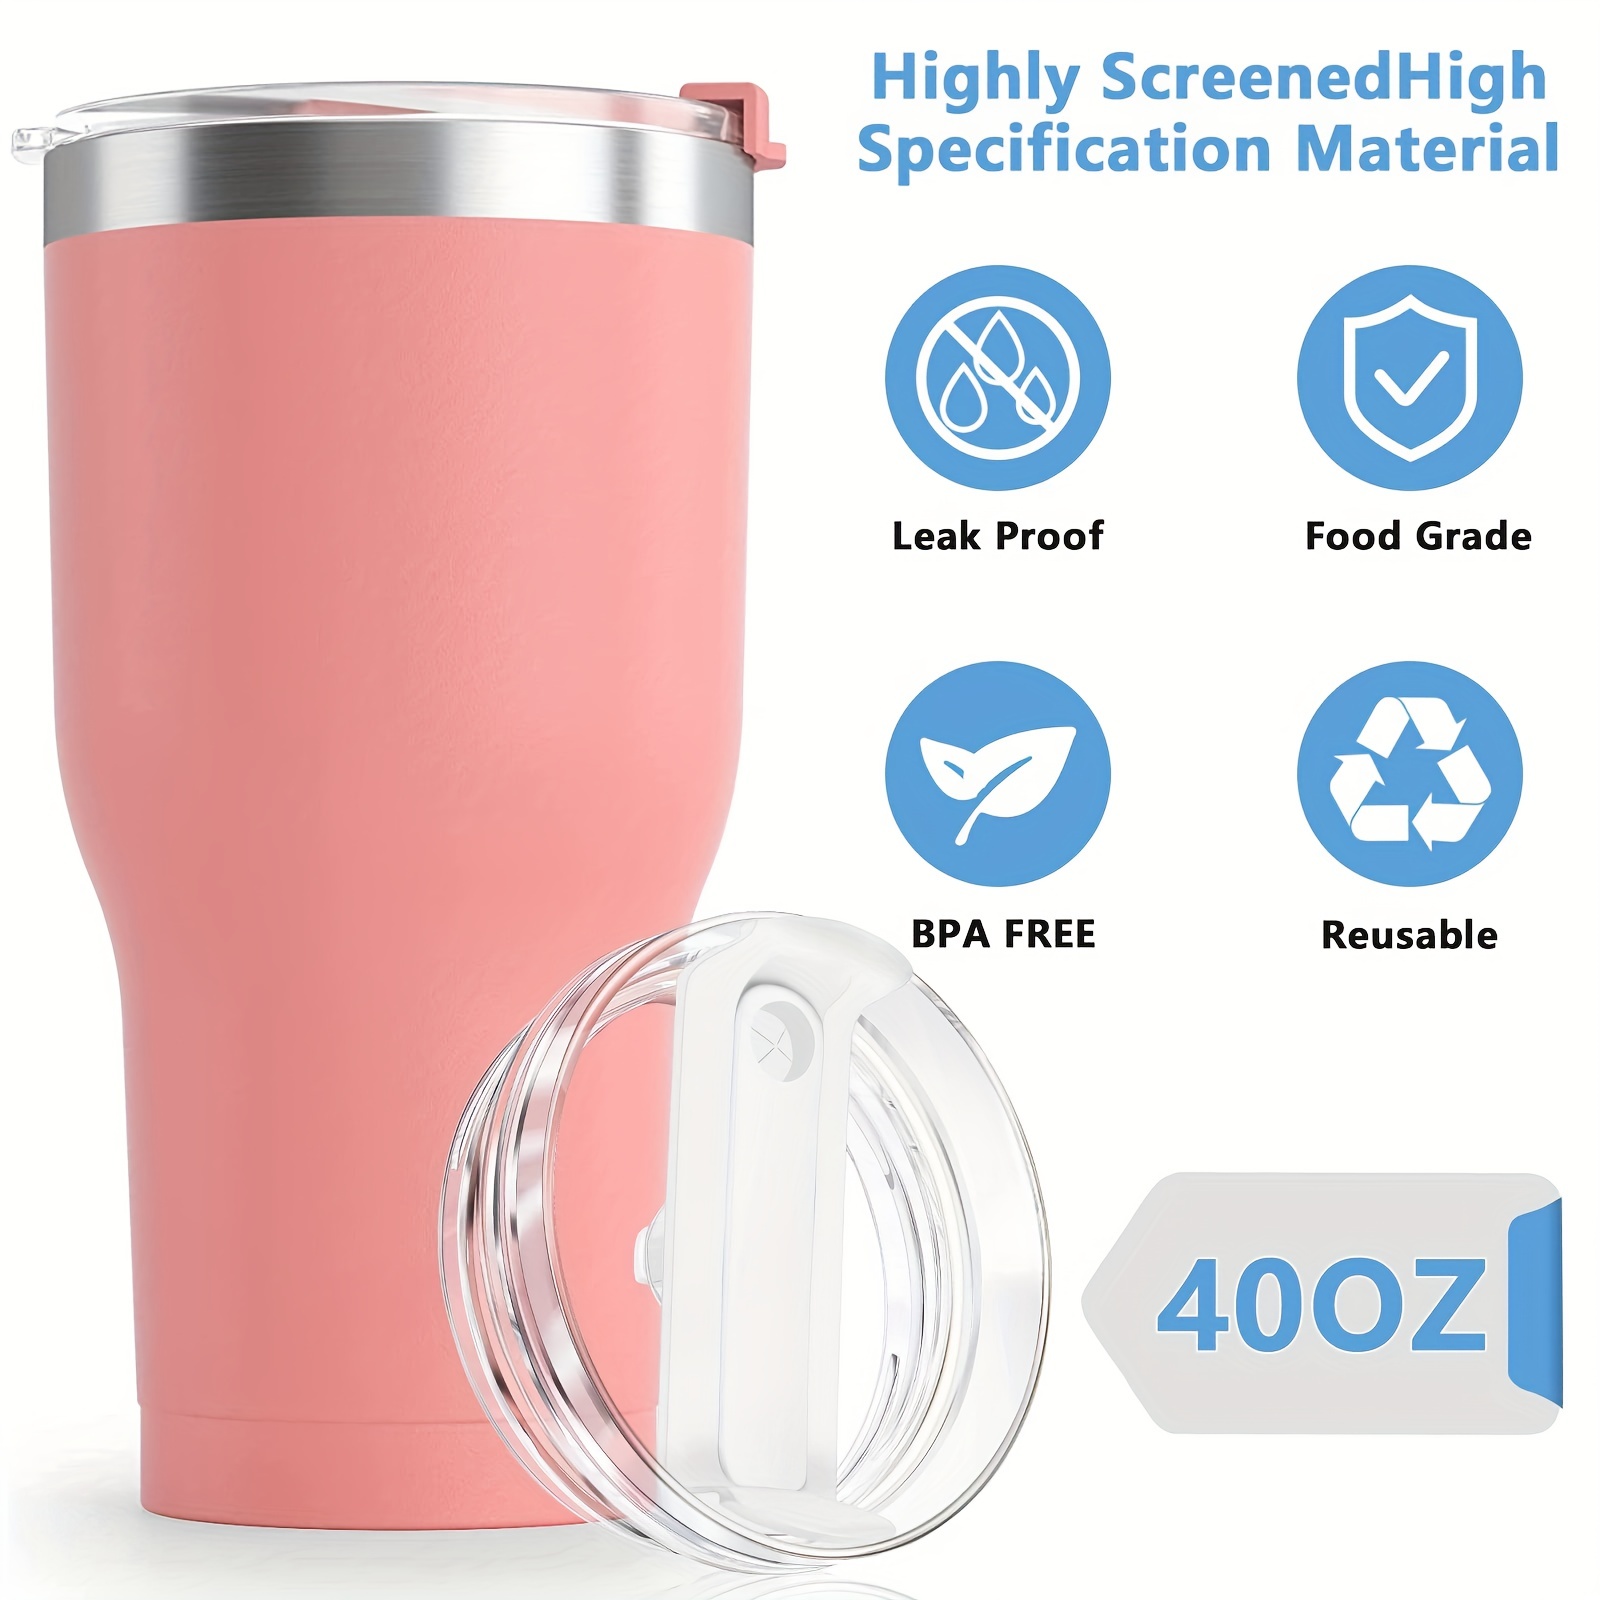 2pcs 40 Oz Tumbler Lid Compatible Stanley, Spill Proof Splash Resistant  Tumbler Covers For Stanley And More Coffee Mugs